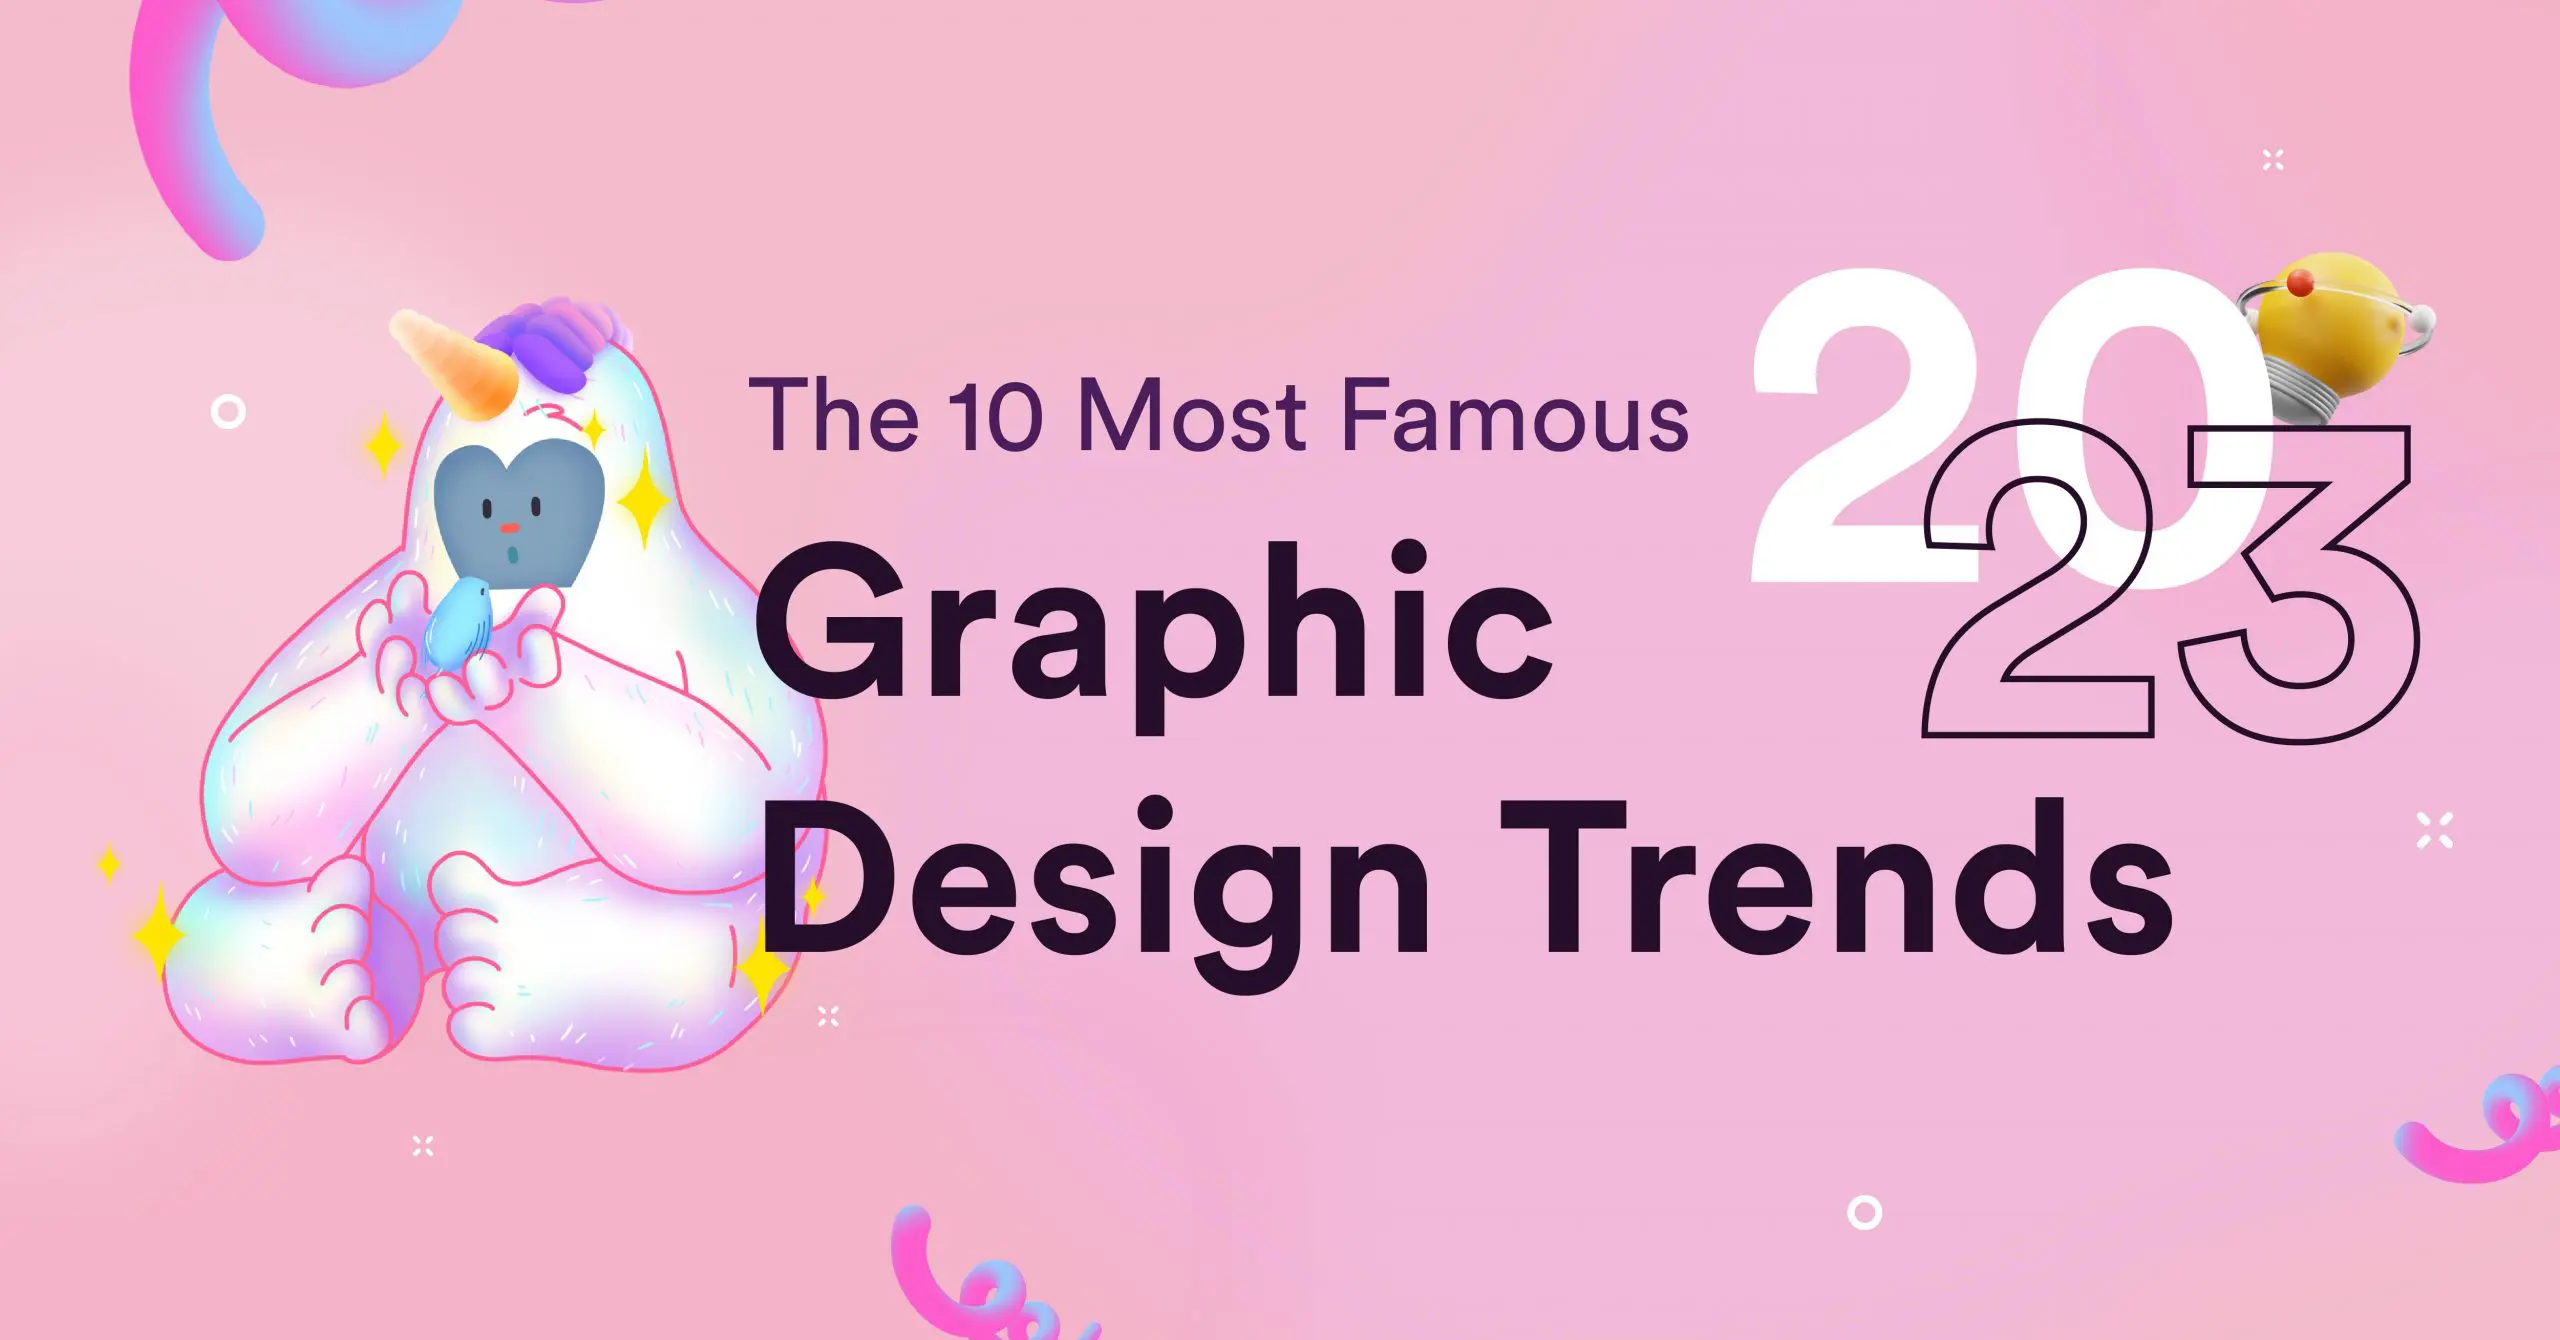 The 10 Most Famous Graphic Design Trends in 2023